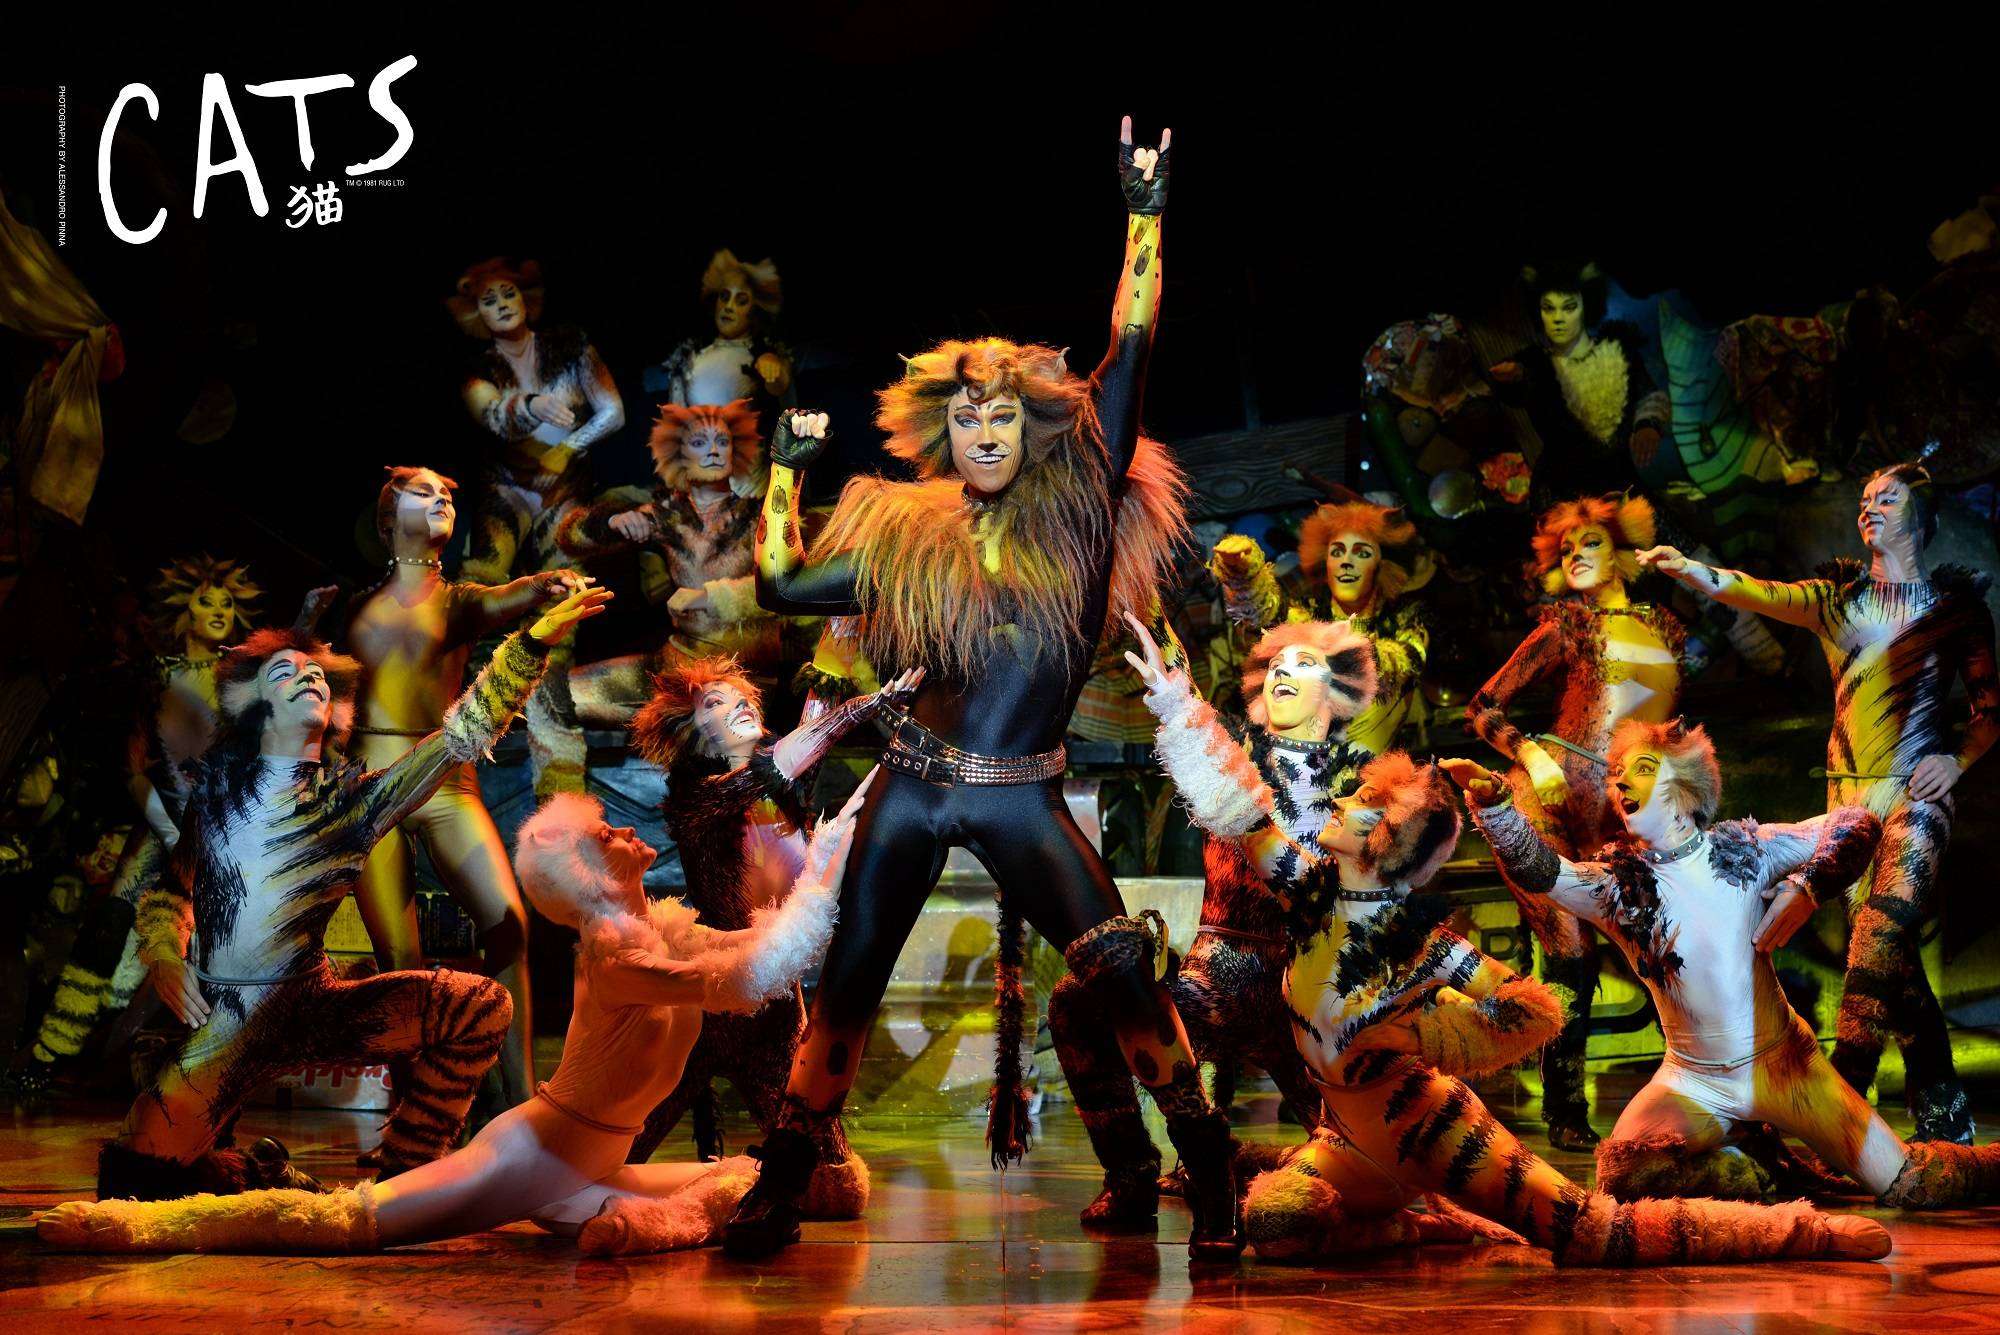 cats the musical has cancelled all shows in malaysia